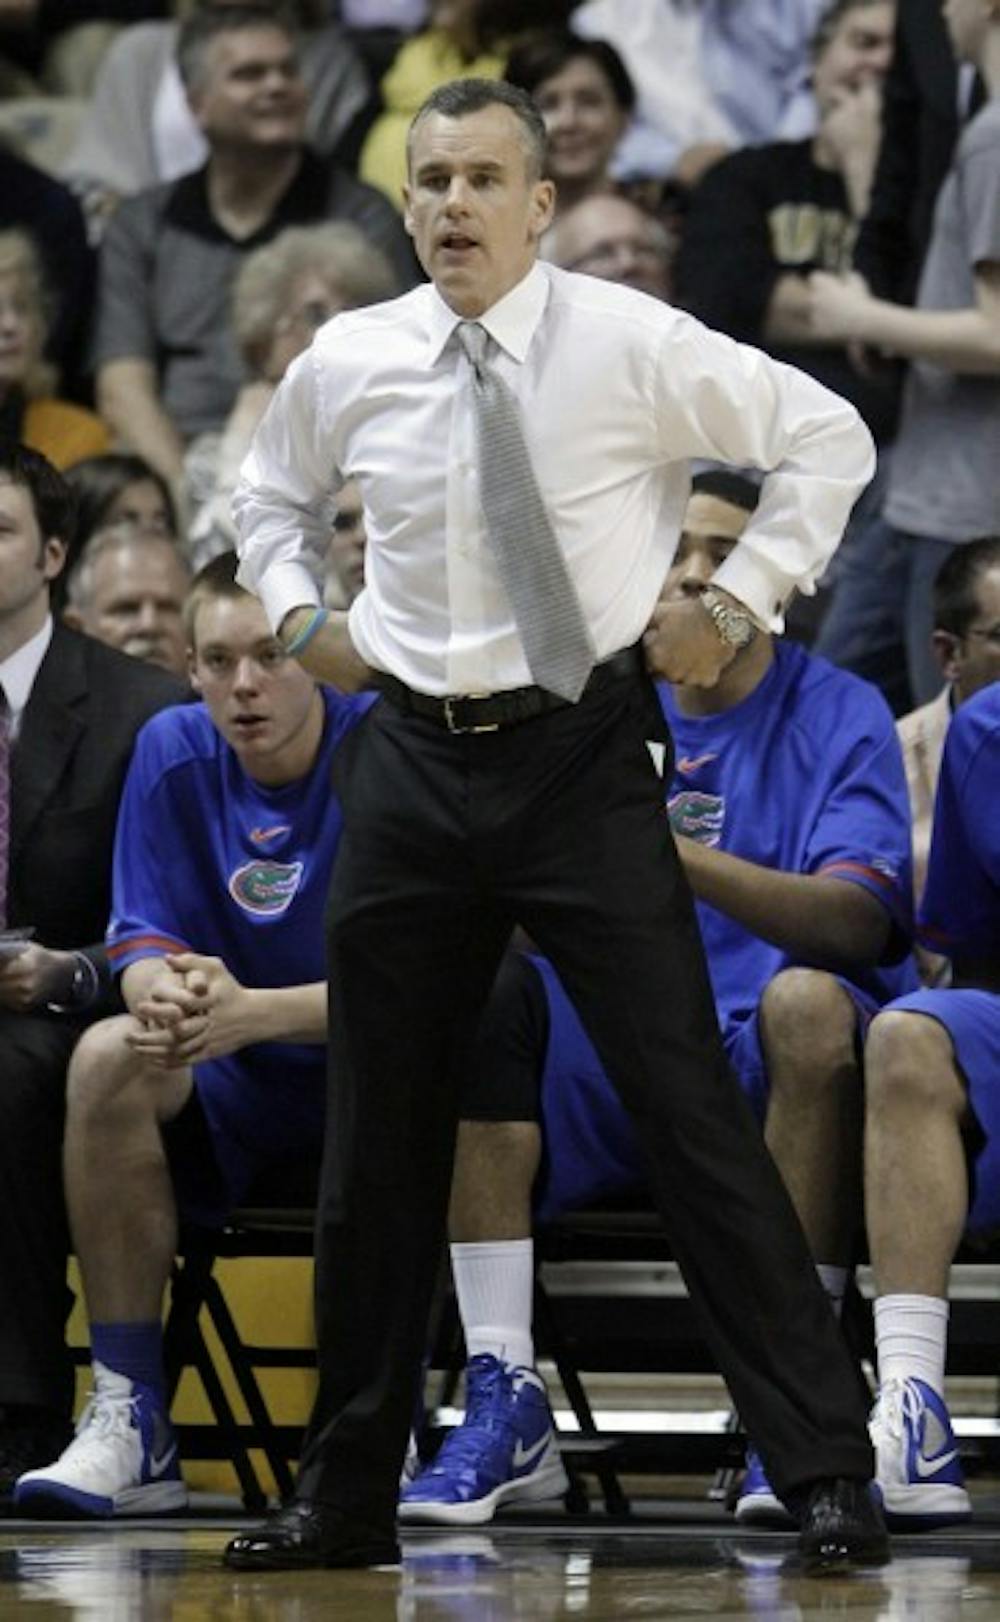 <p>After complaining about effort following a loss to UGA, coach Billy Donovan said he was impressed with UF’s resiliency in Tuesday’s 77-67 loss at Vanderbilt.</p>